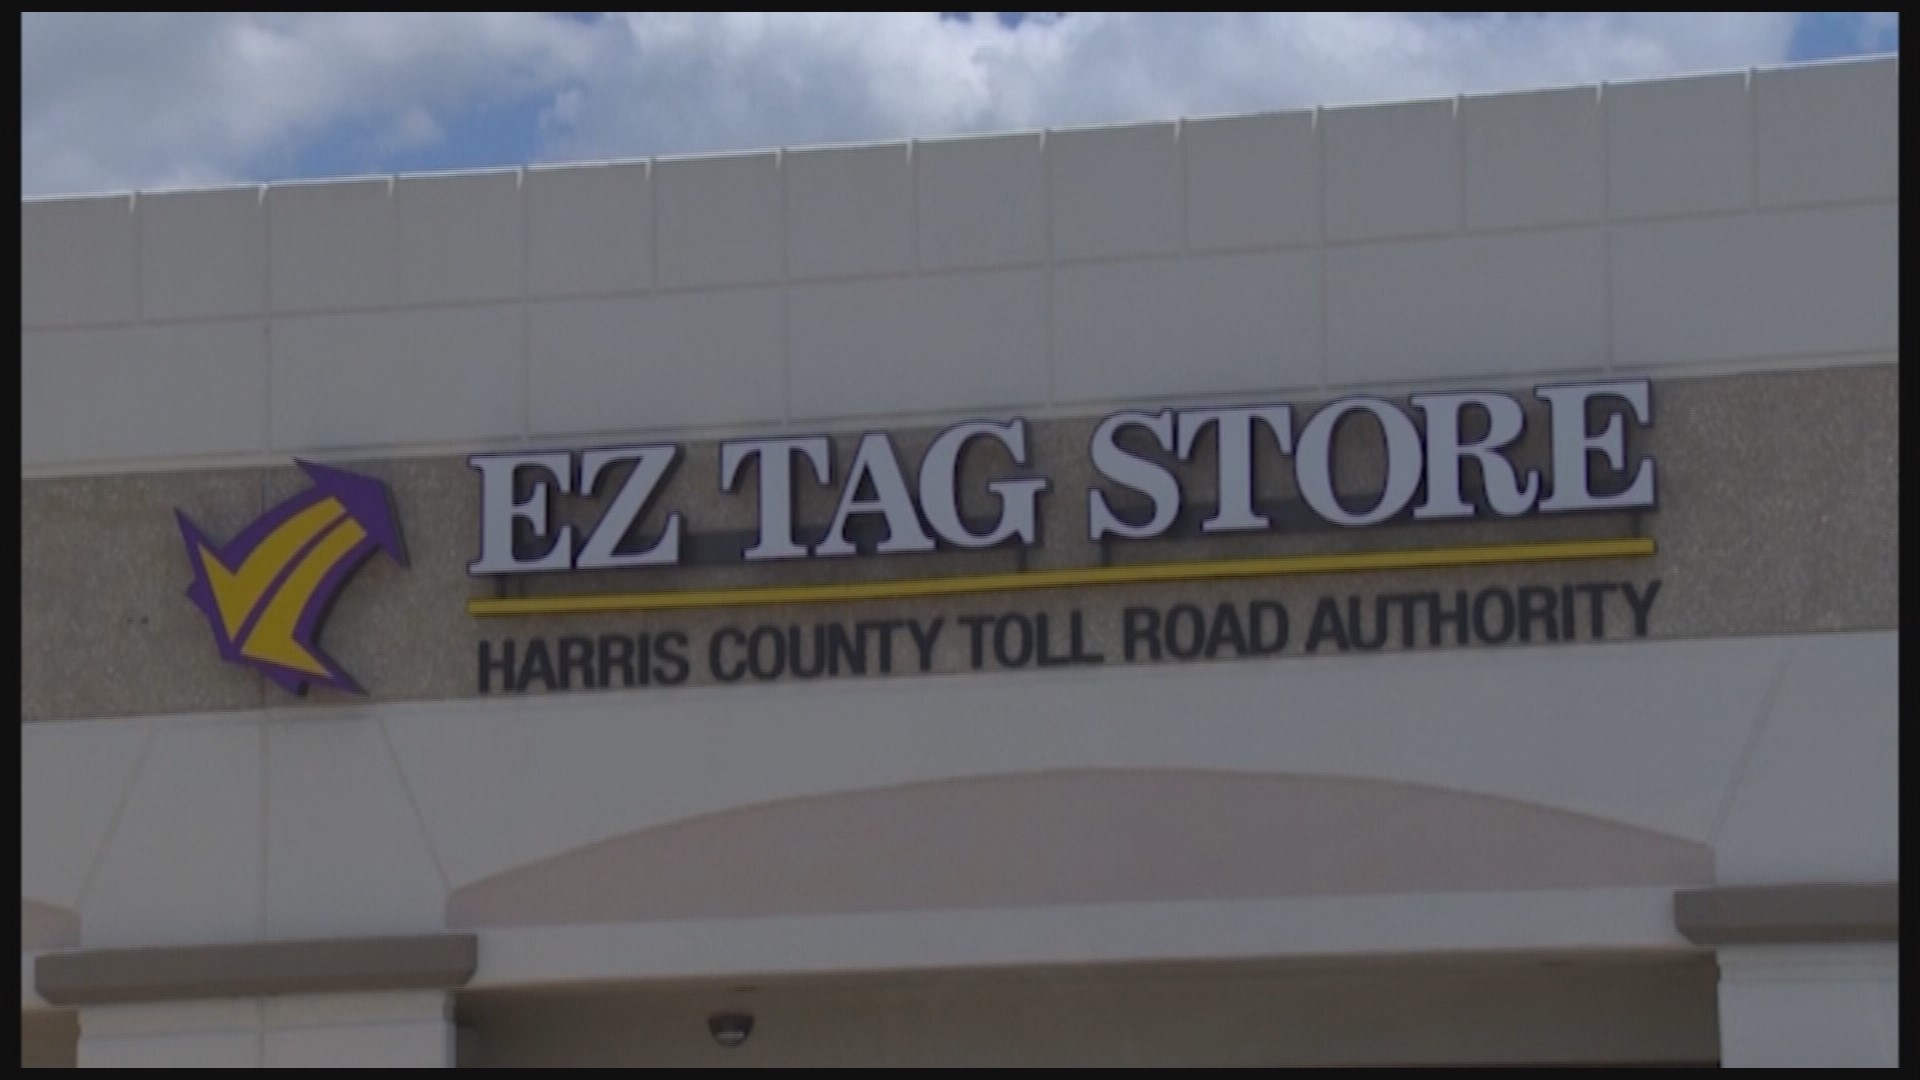 khou.com | EZ Tag system causes major headache for drivers in Harris County1920 x 1080